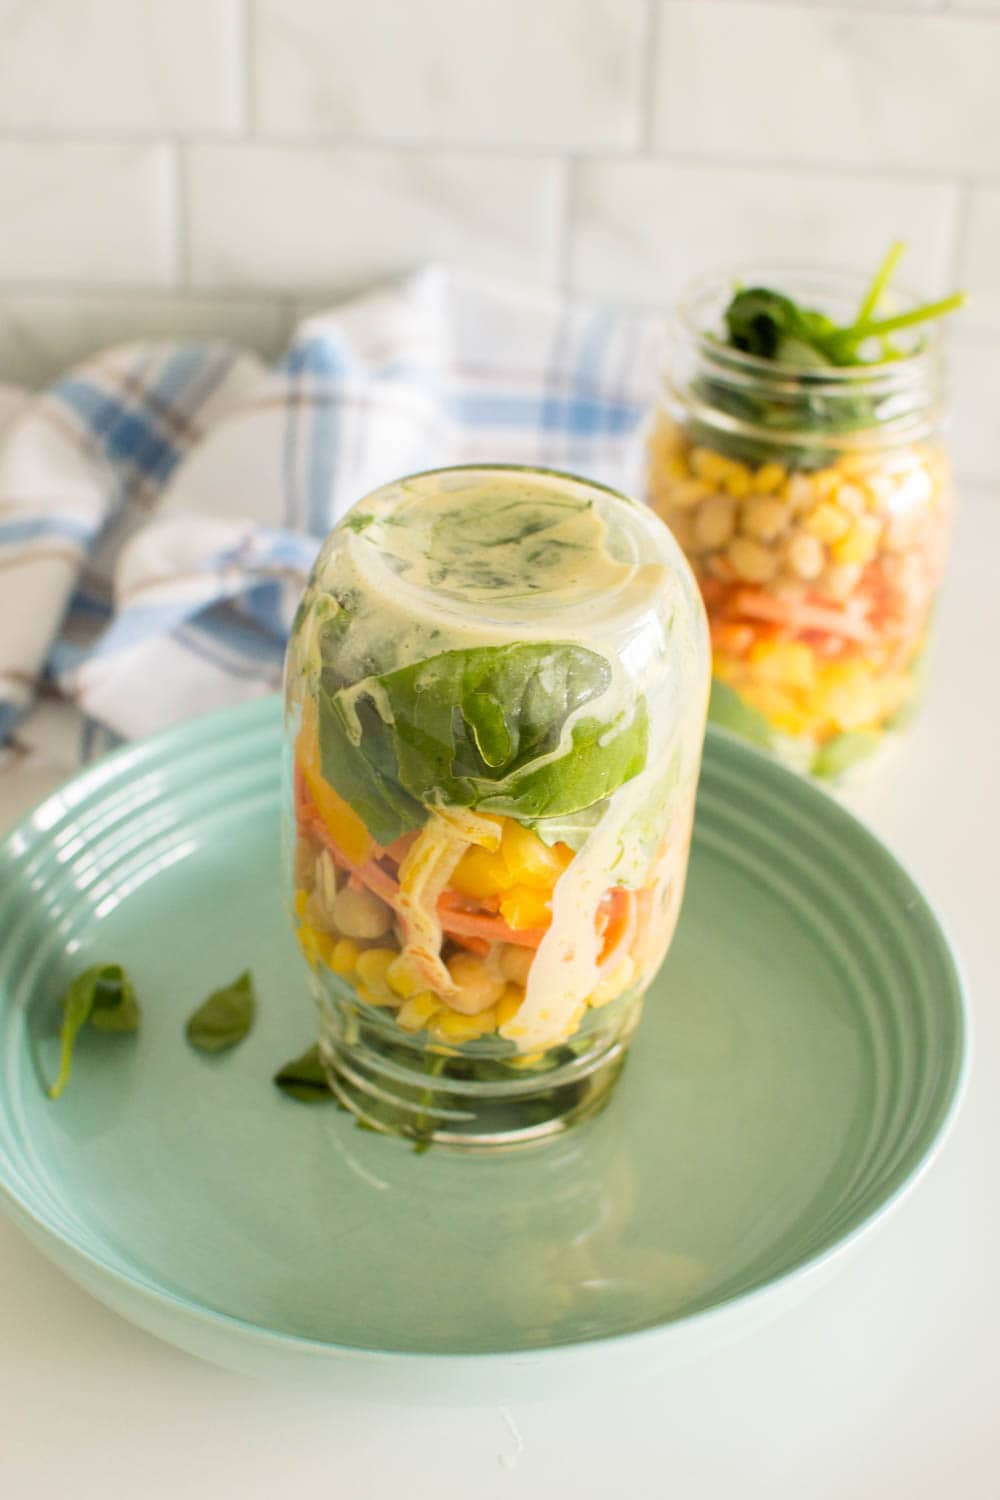 Placing a mason jar salad upside down on a salad plate, ready to be served